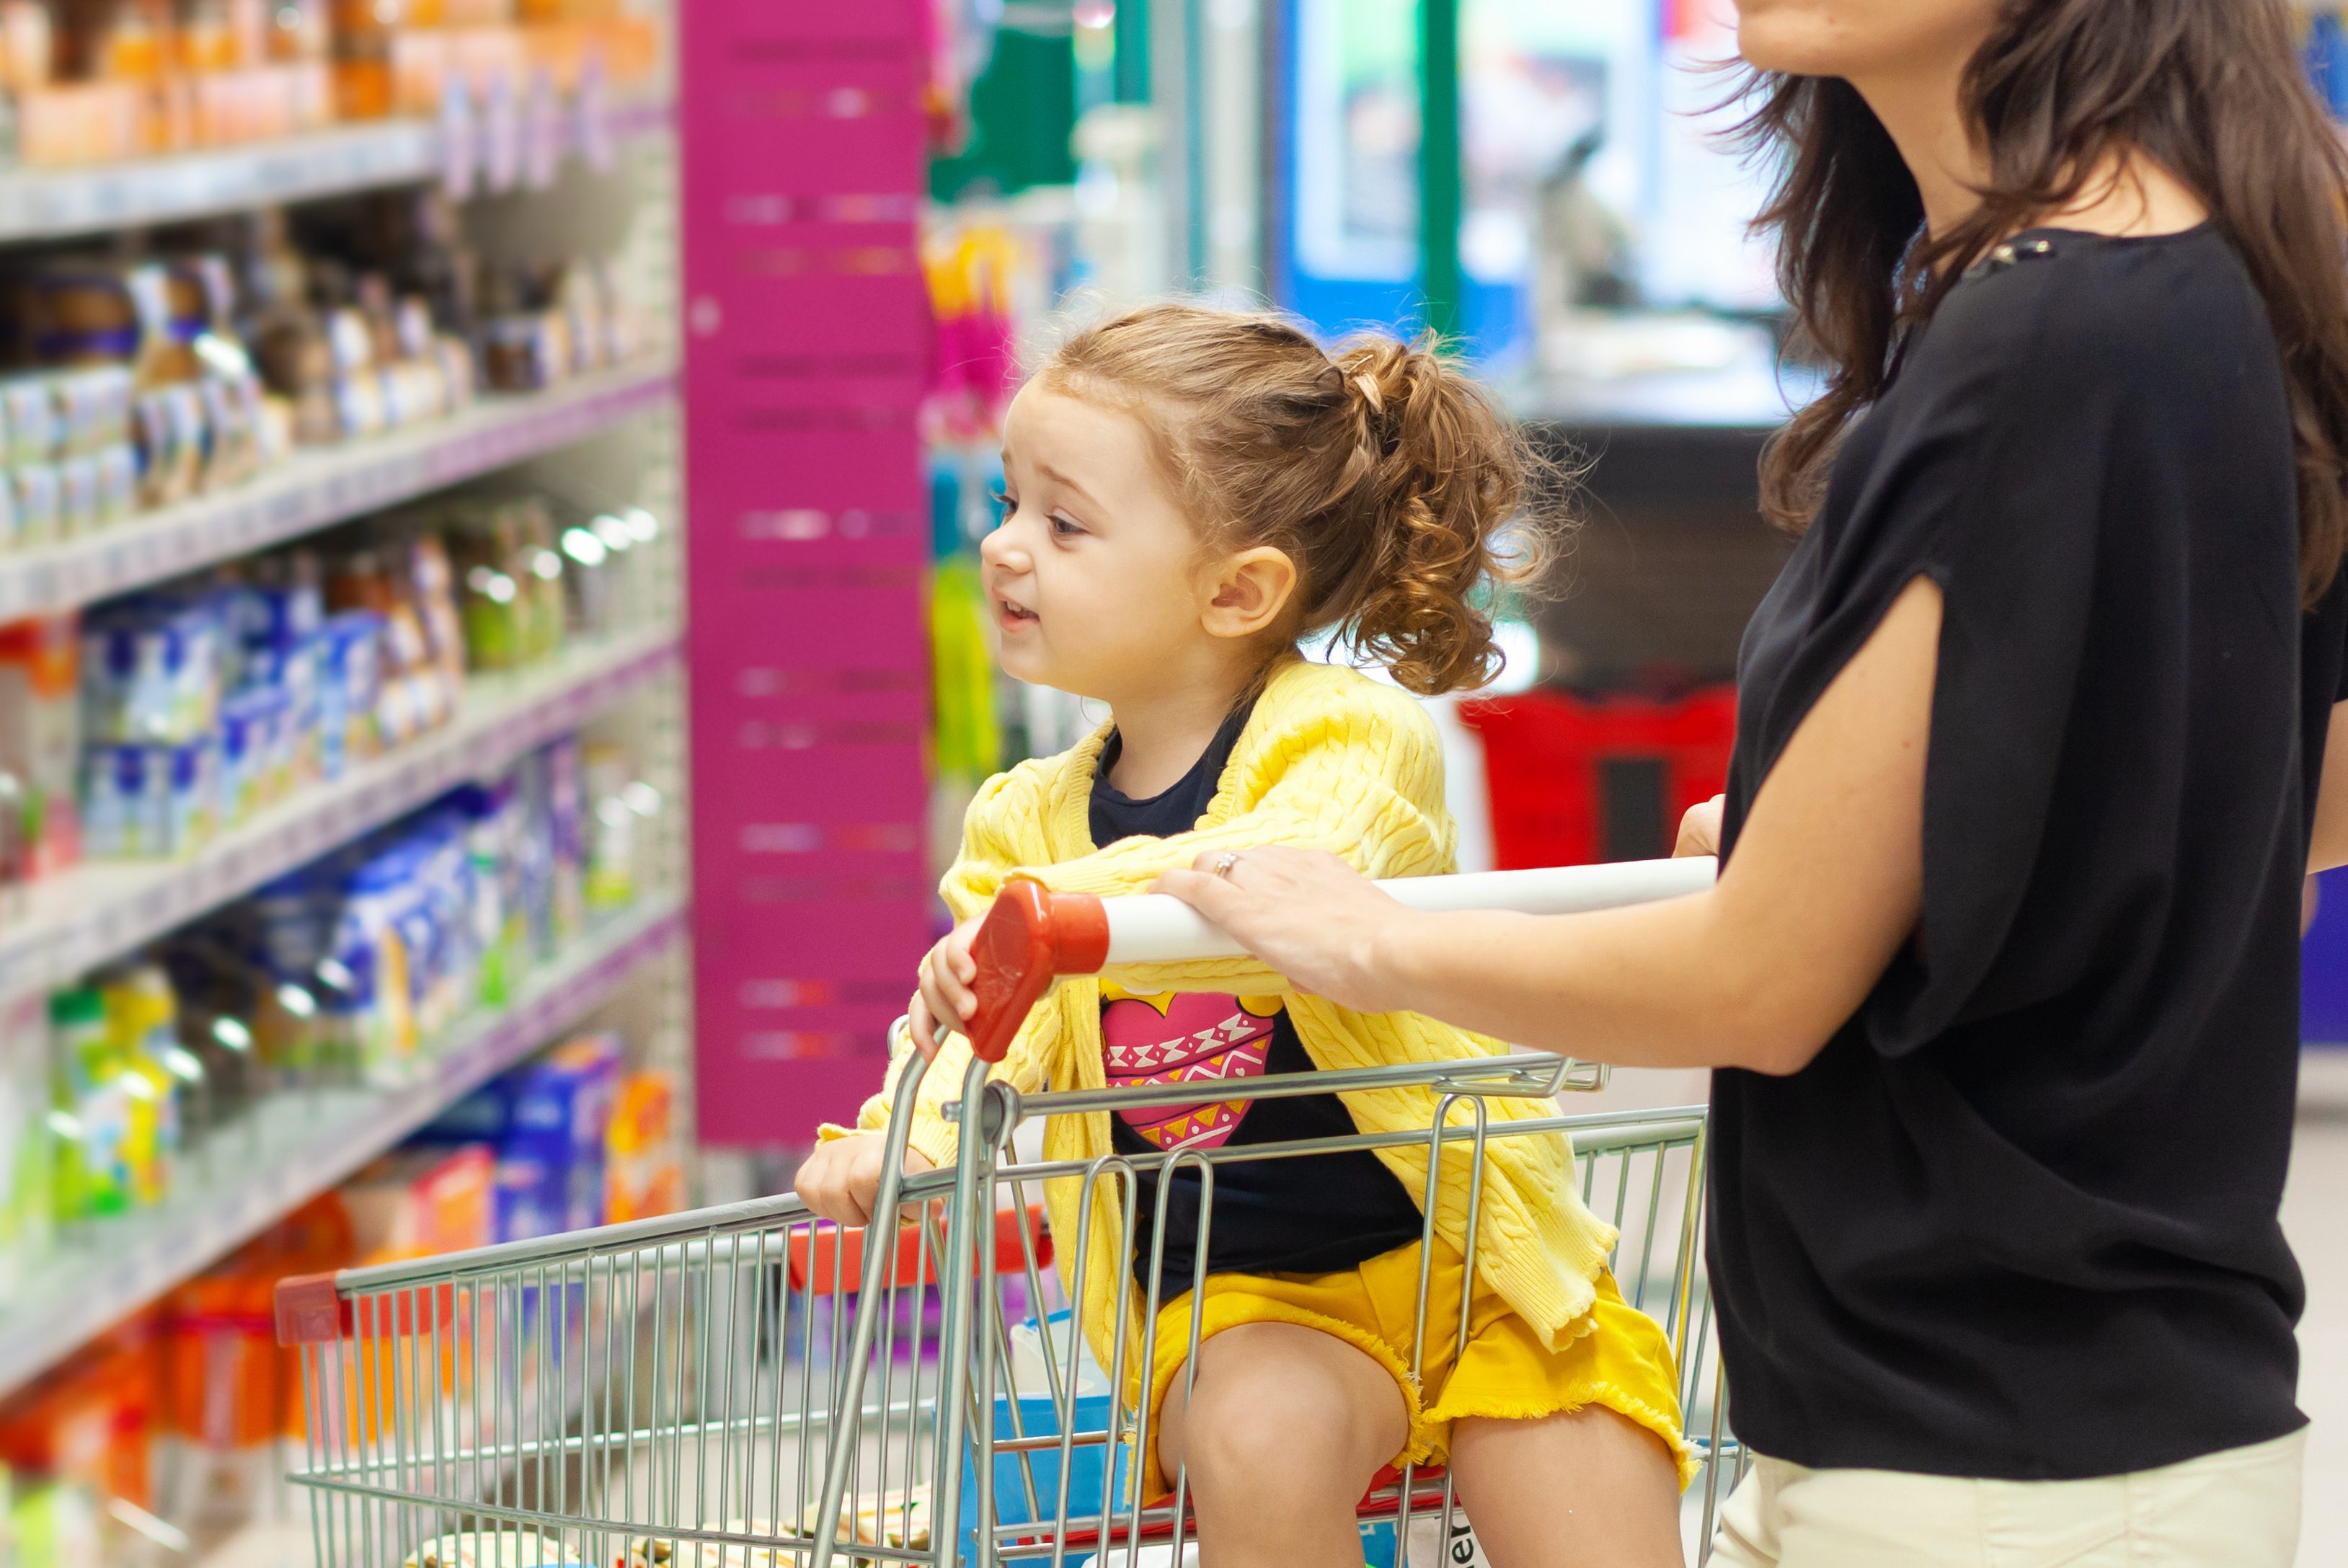 Child looks at grocery shelf selection from a shopping cart. (Shutterstock Image)